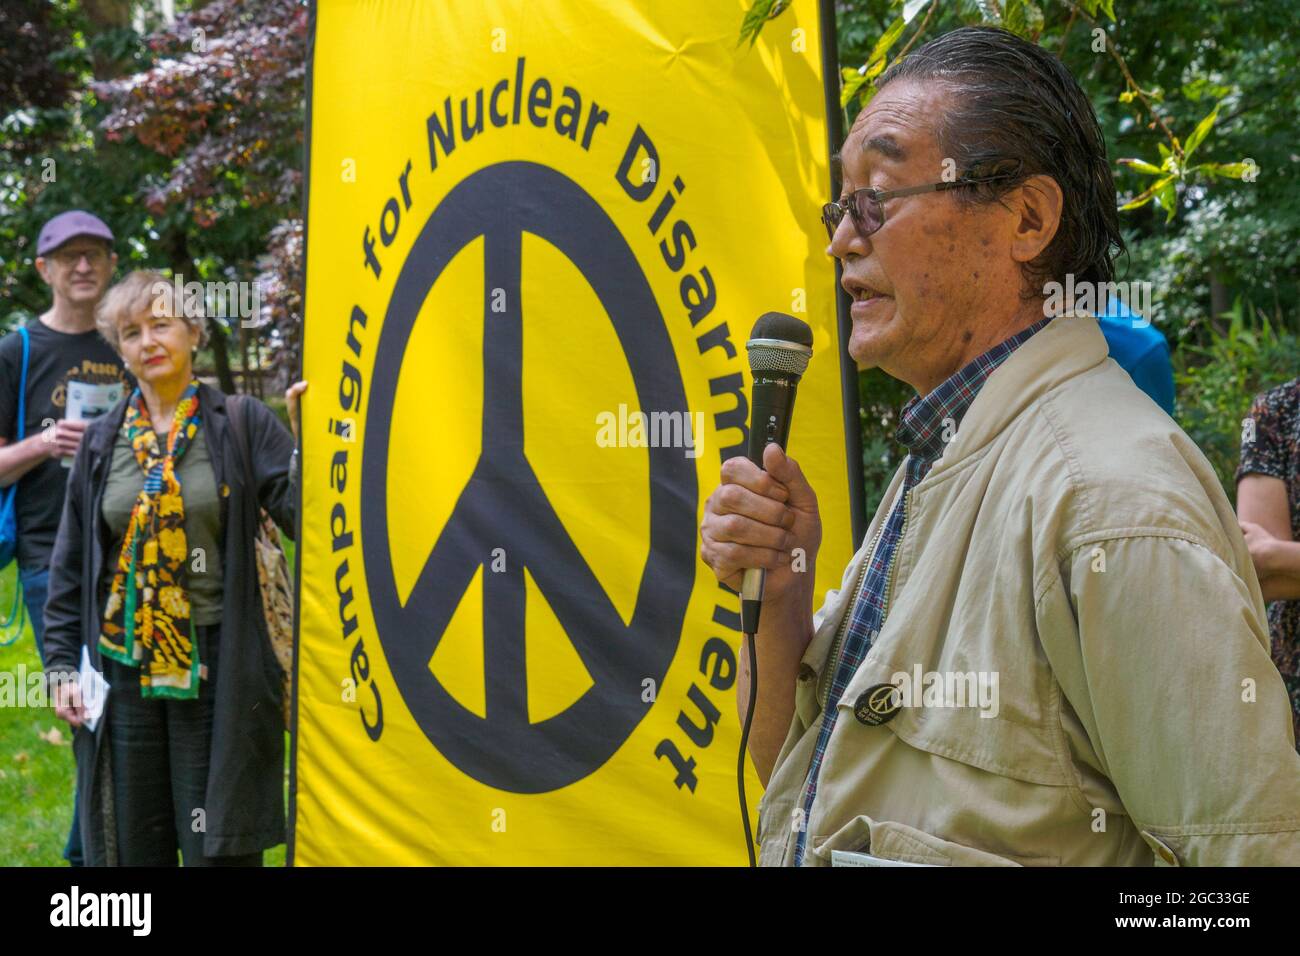 London, UK. 6th August 2021. A Japanese nuclear protester speaks. 76 years after atomic bombs were dropped on Hiroshima and Nagaski, London CND met at the Hiroshima Cherry tree in Tavistock Square to remember the many killed and survivors who are still suffering the event, and to celebrate the UN treaty prohibiting nuclear weapons which came into force this January. They called on the government to end the UK's nuclear weapon programme. Peter Marshall/Alamy Live News Stock Photo